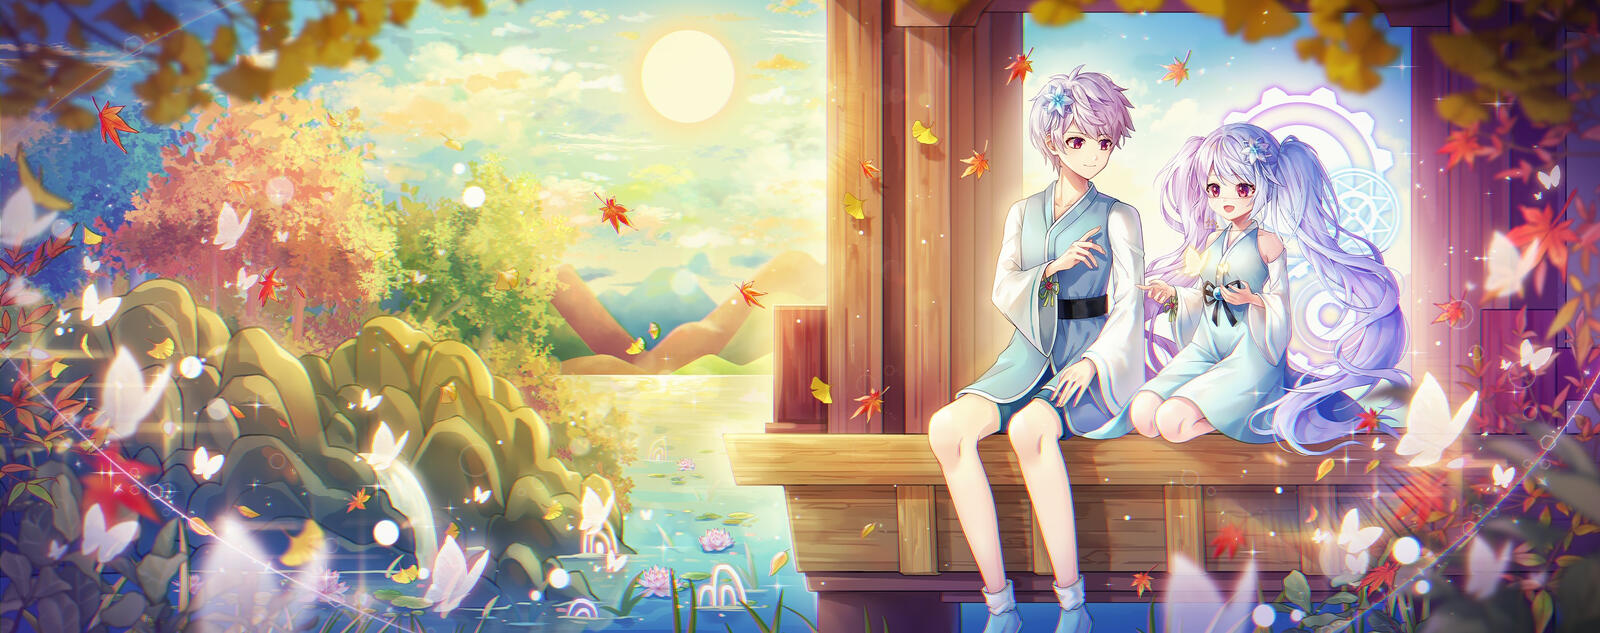 Wallpapers dress wallpaper anime girl and boy clouds on the desktop